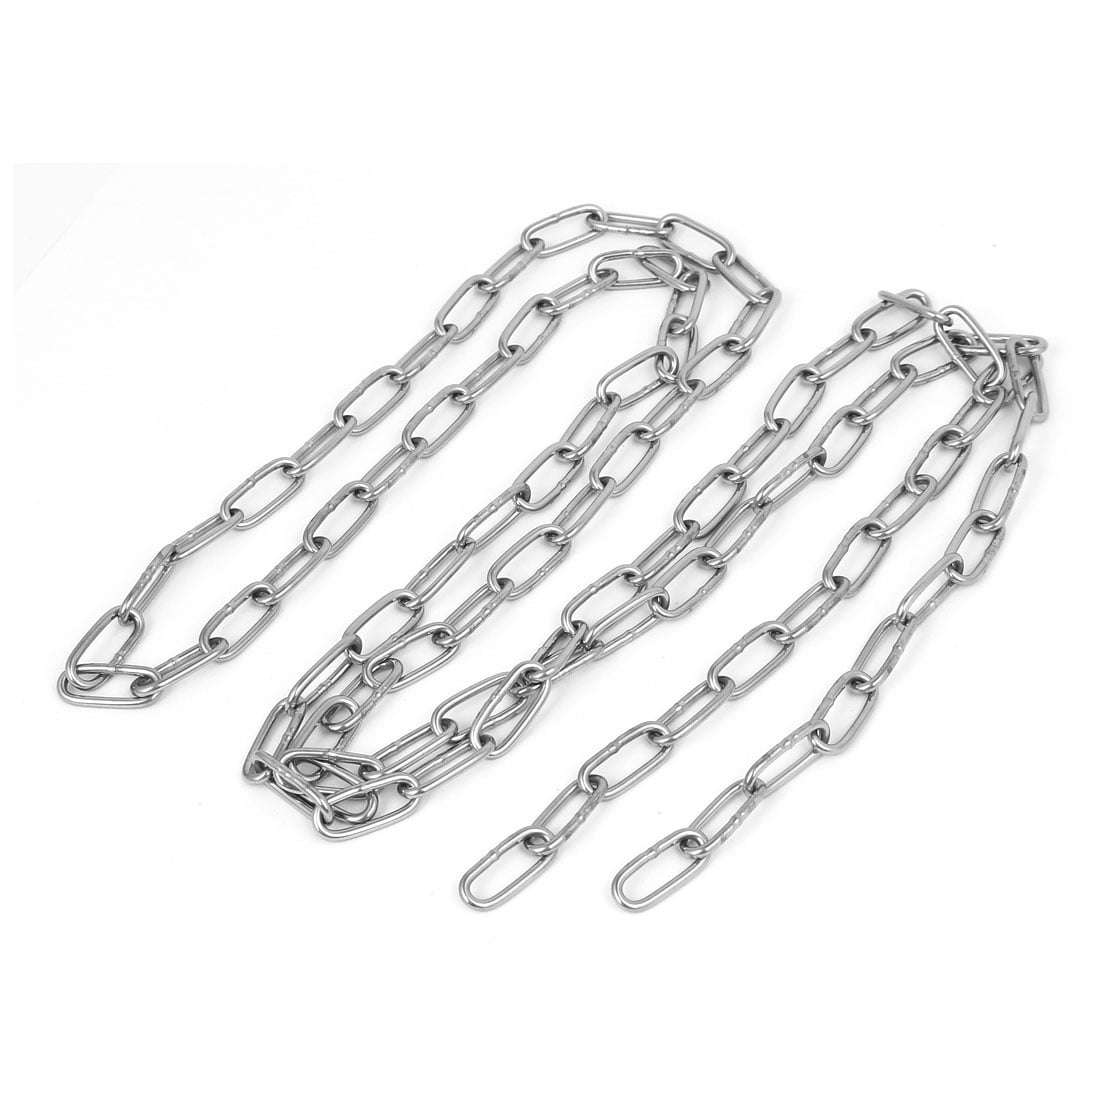 Pet Dog Training Clothes Hanging 304 Stainless Steel Coil Chain M1.2x16.4Ft 